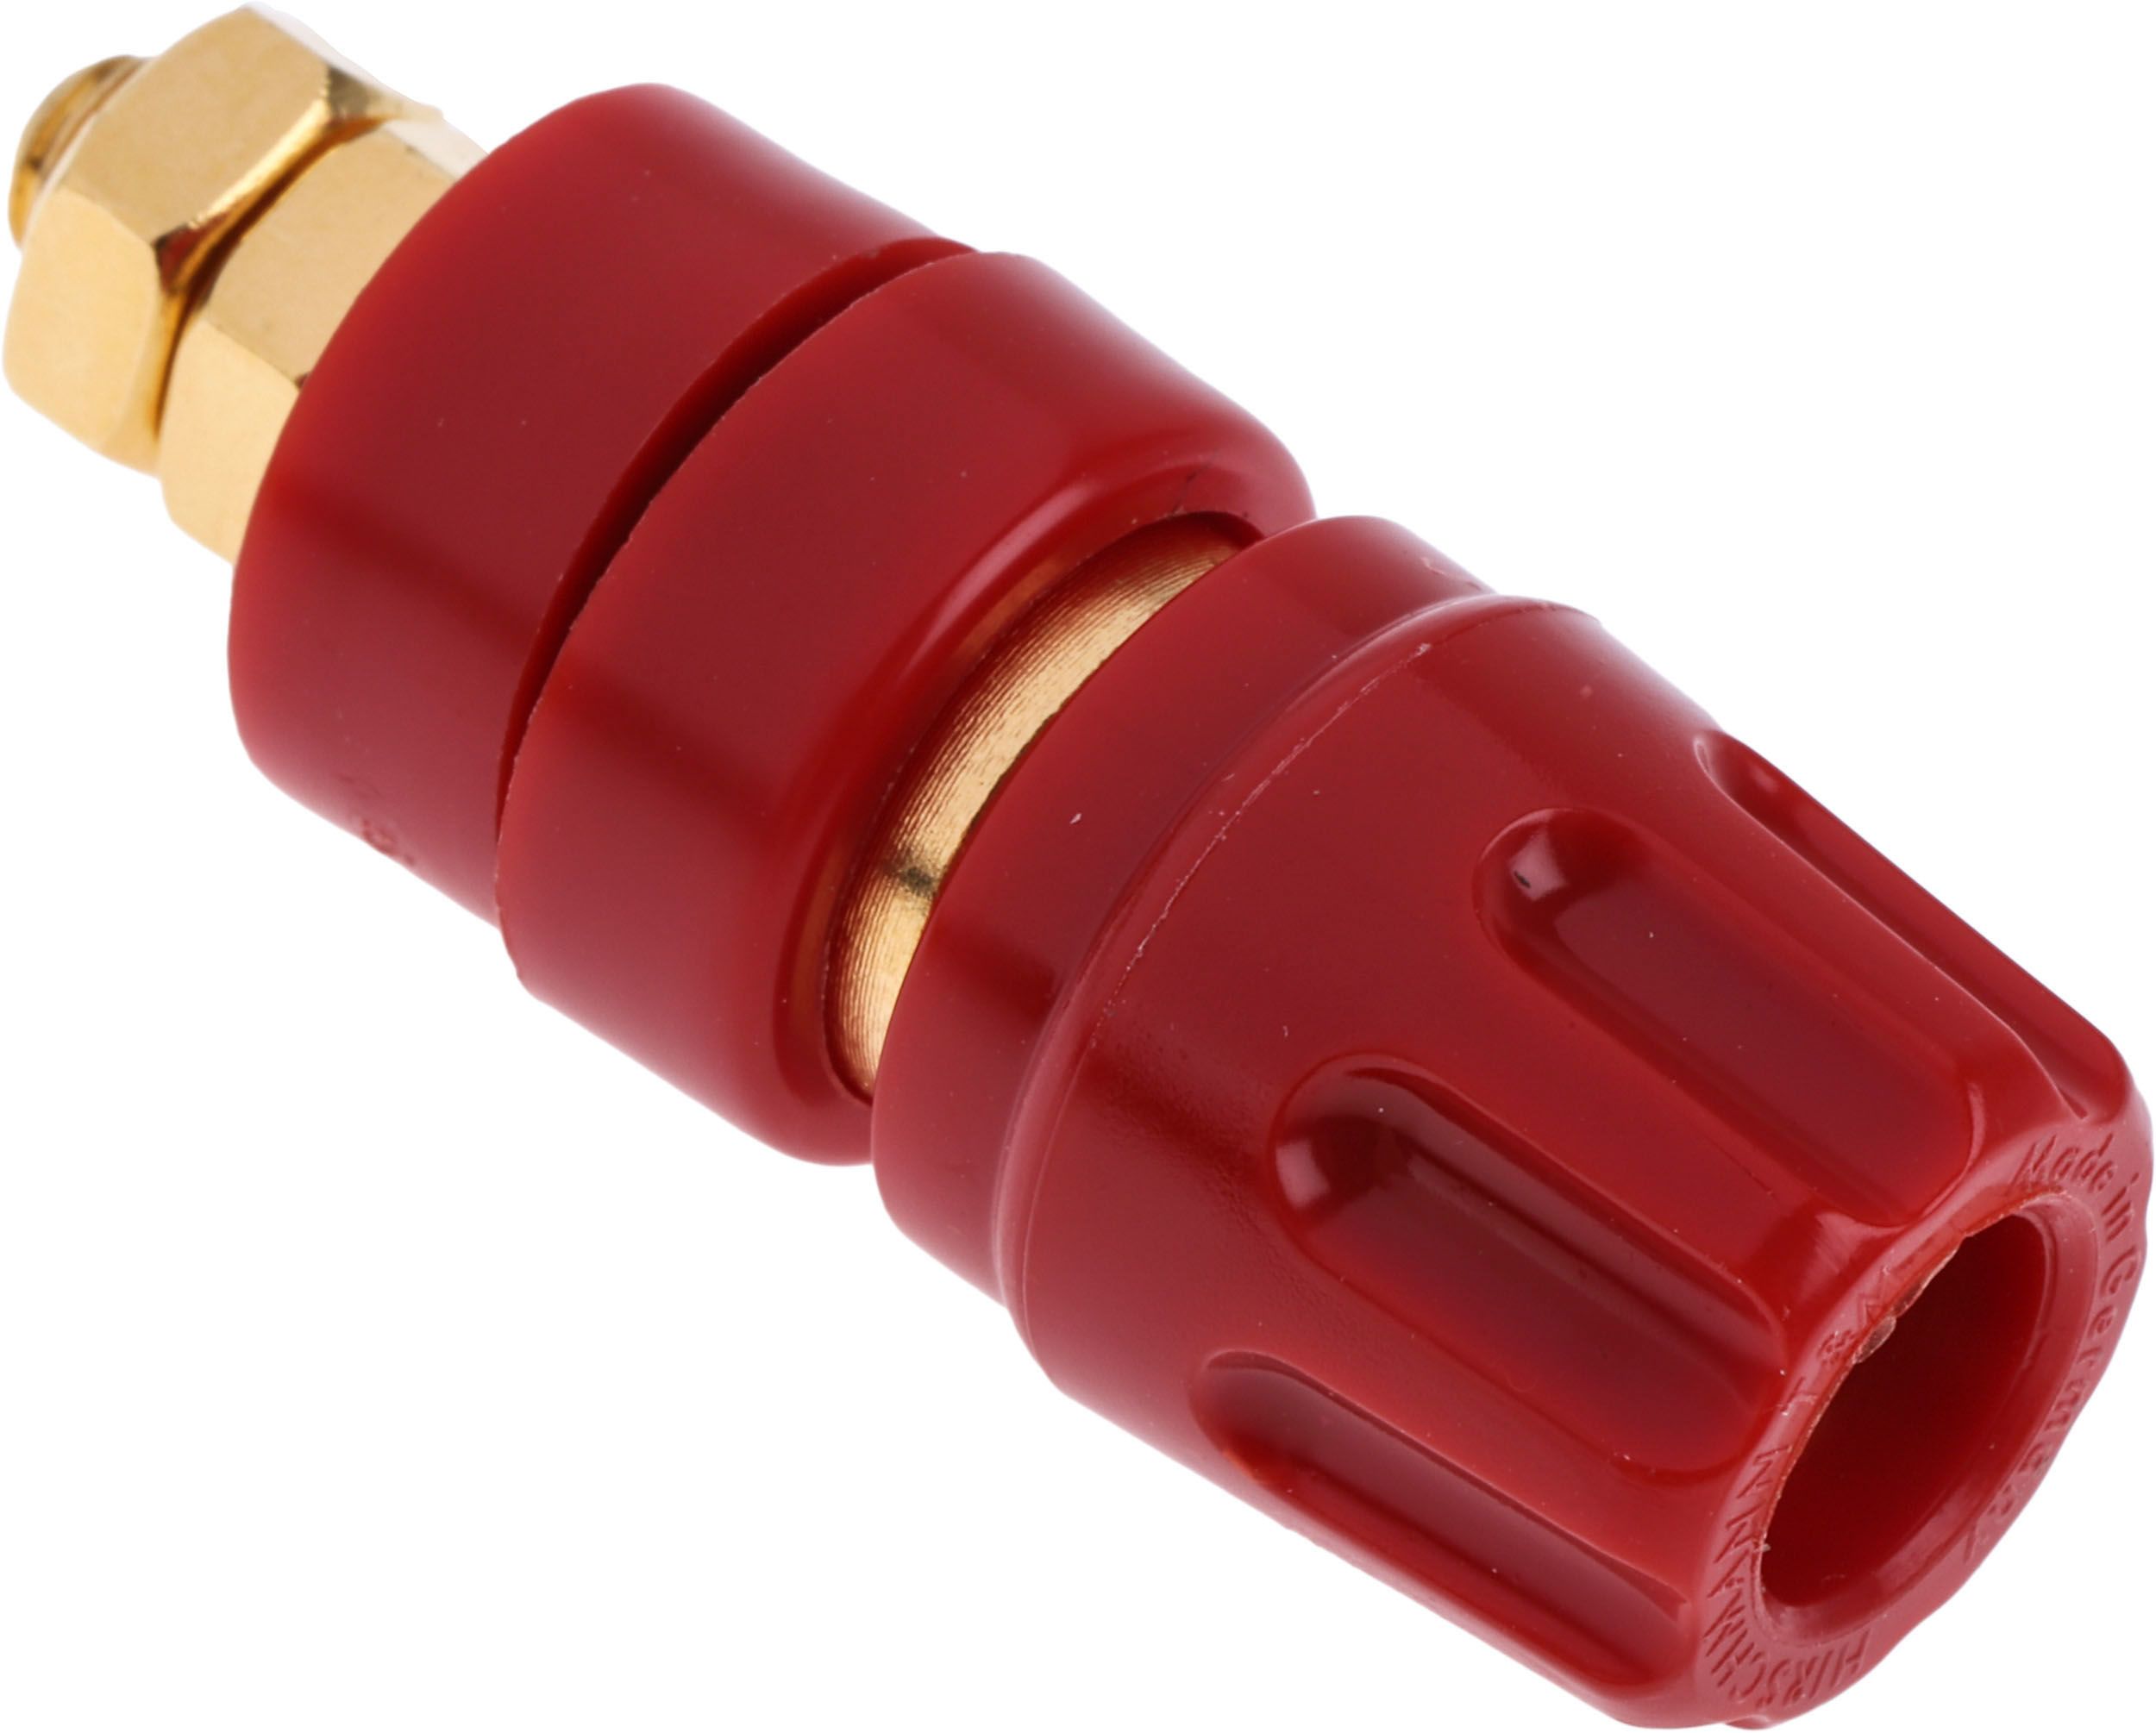 Hirschmann Test & Measurement 35A, Red Binding Post With Brass Contacts and Gold Plated - 8mm Hole Diameter